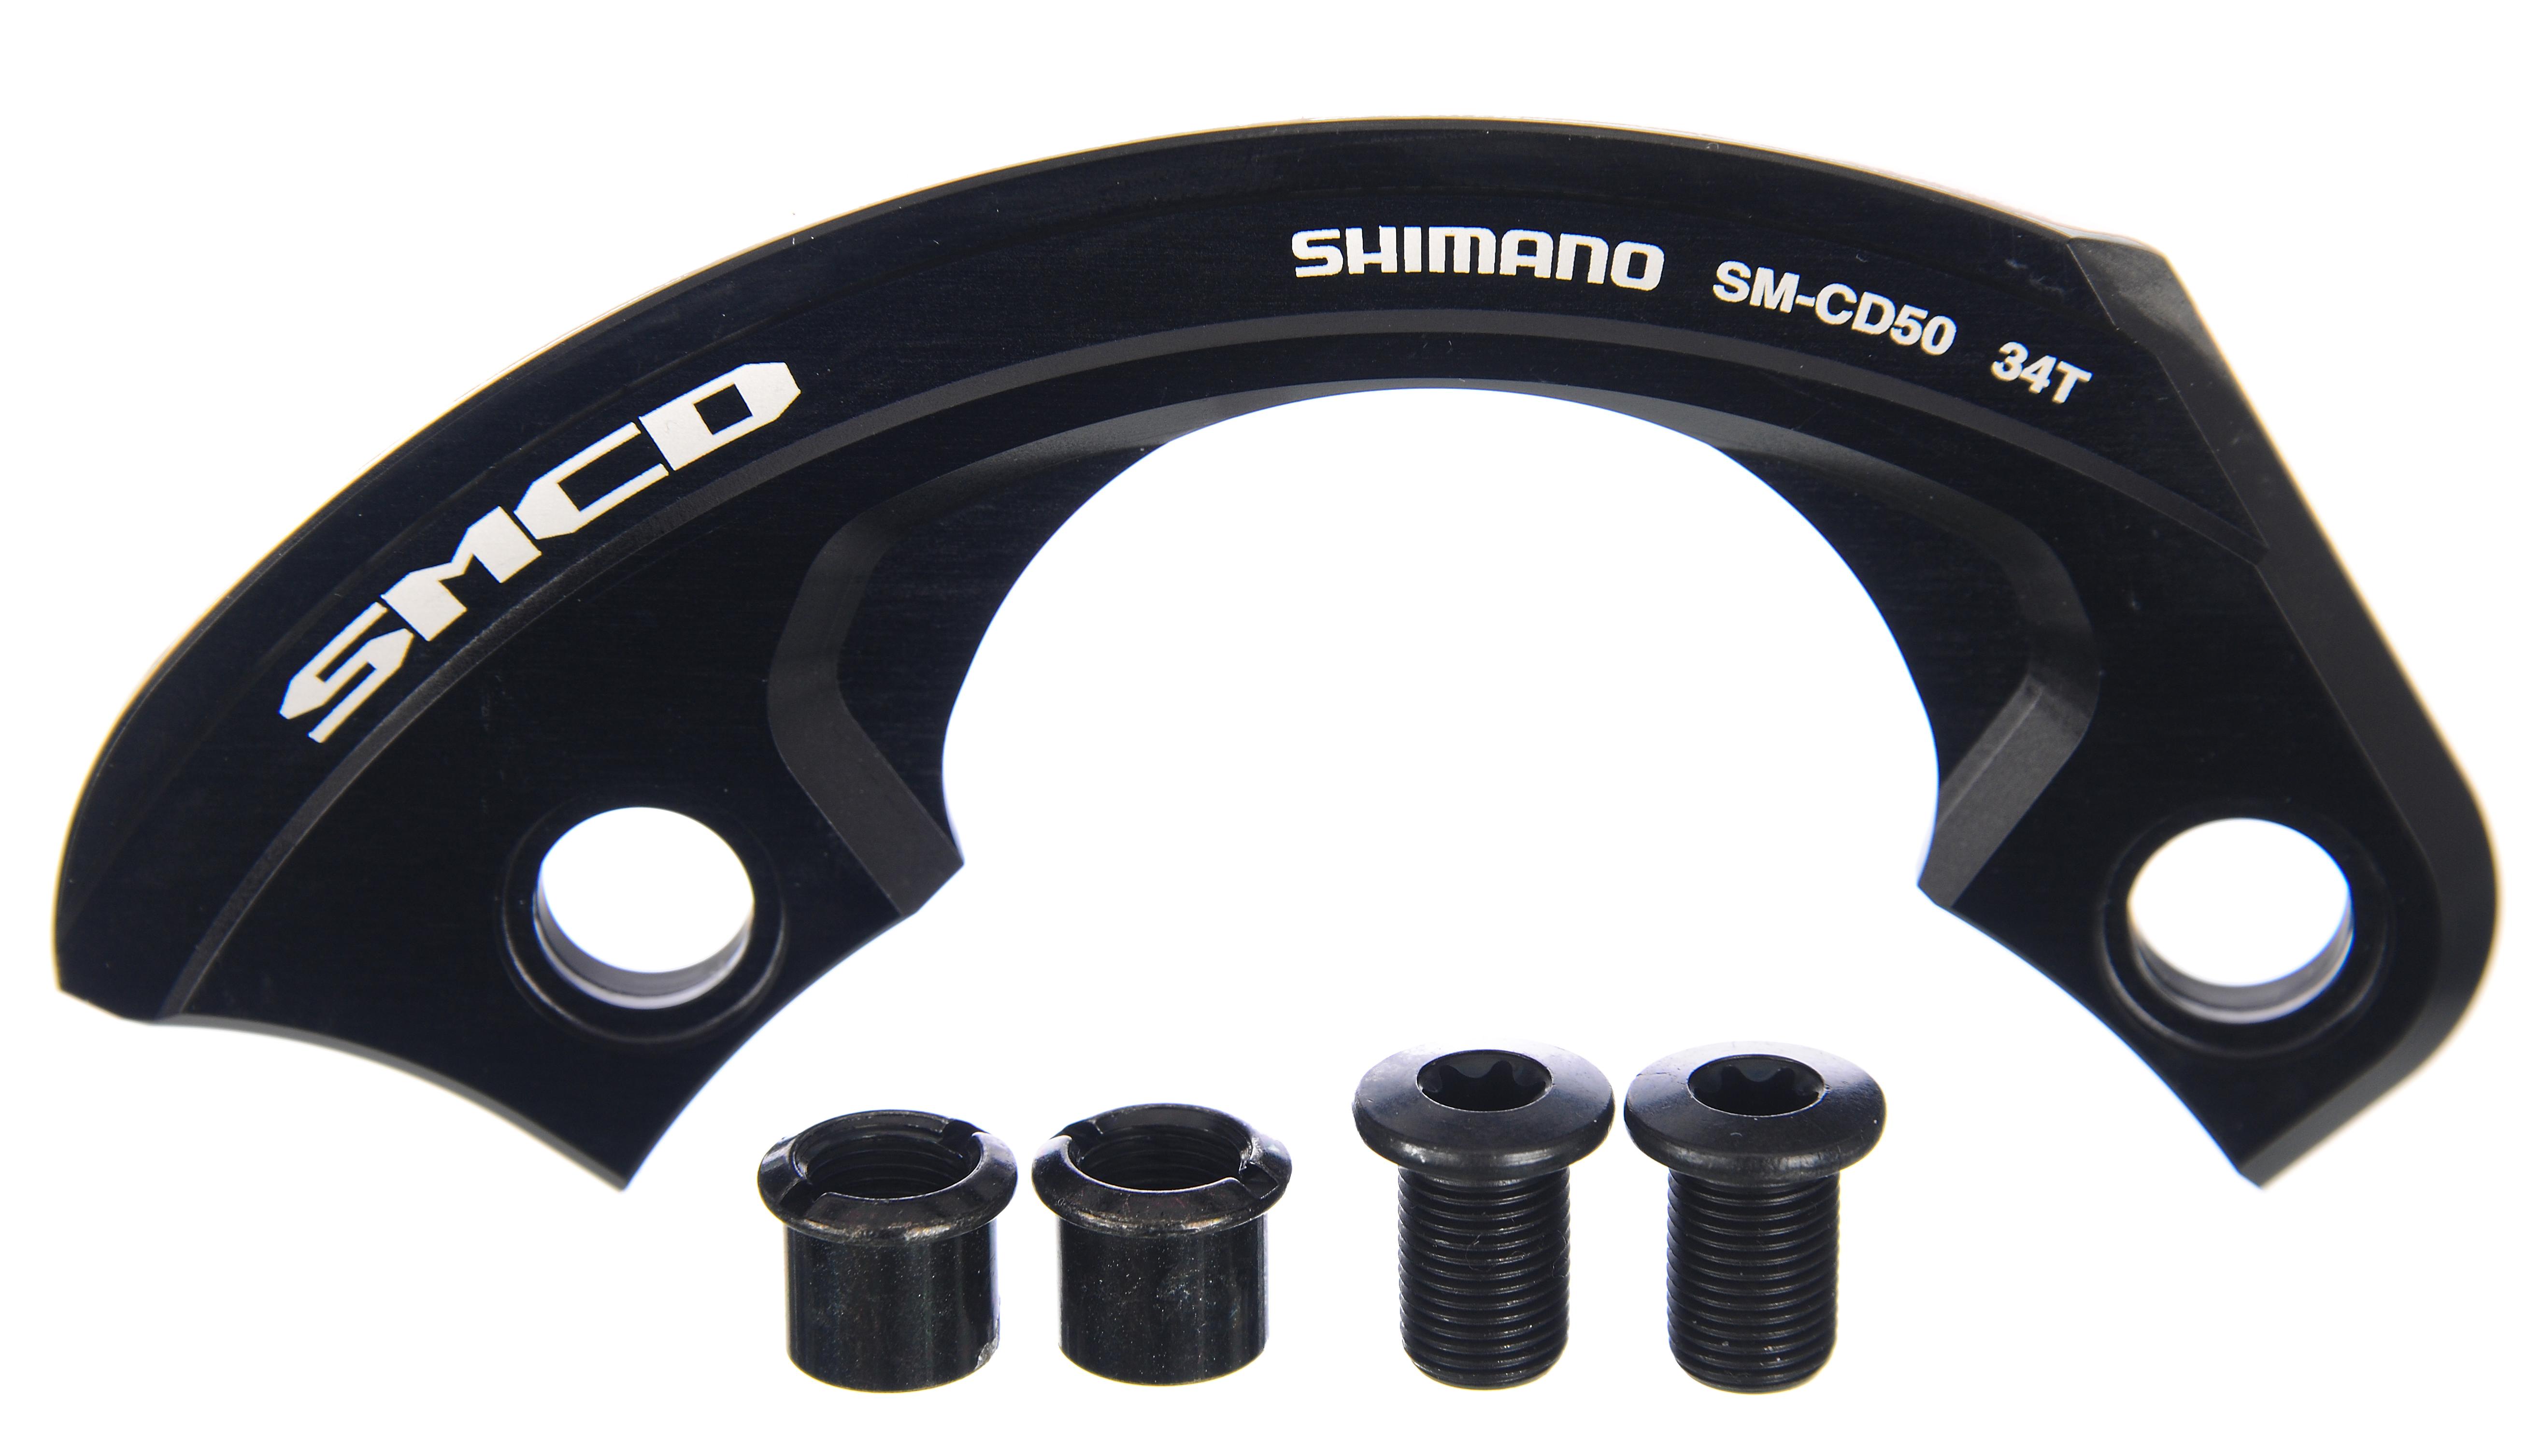 Shimano Saint Cd50 Chain Guard - Without Guide - Black